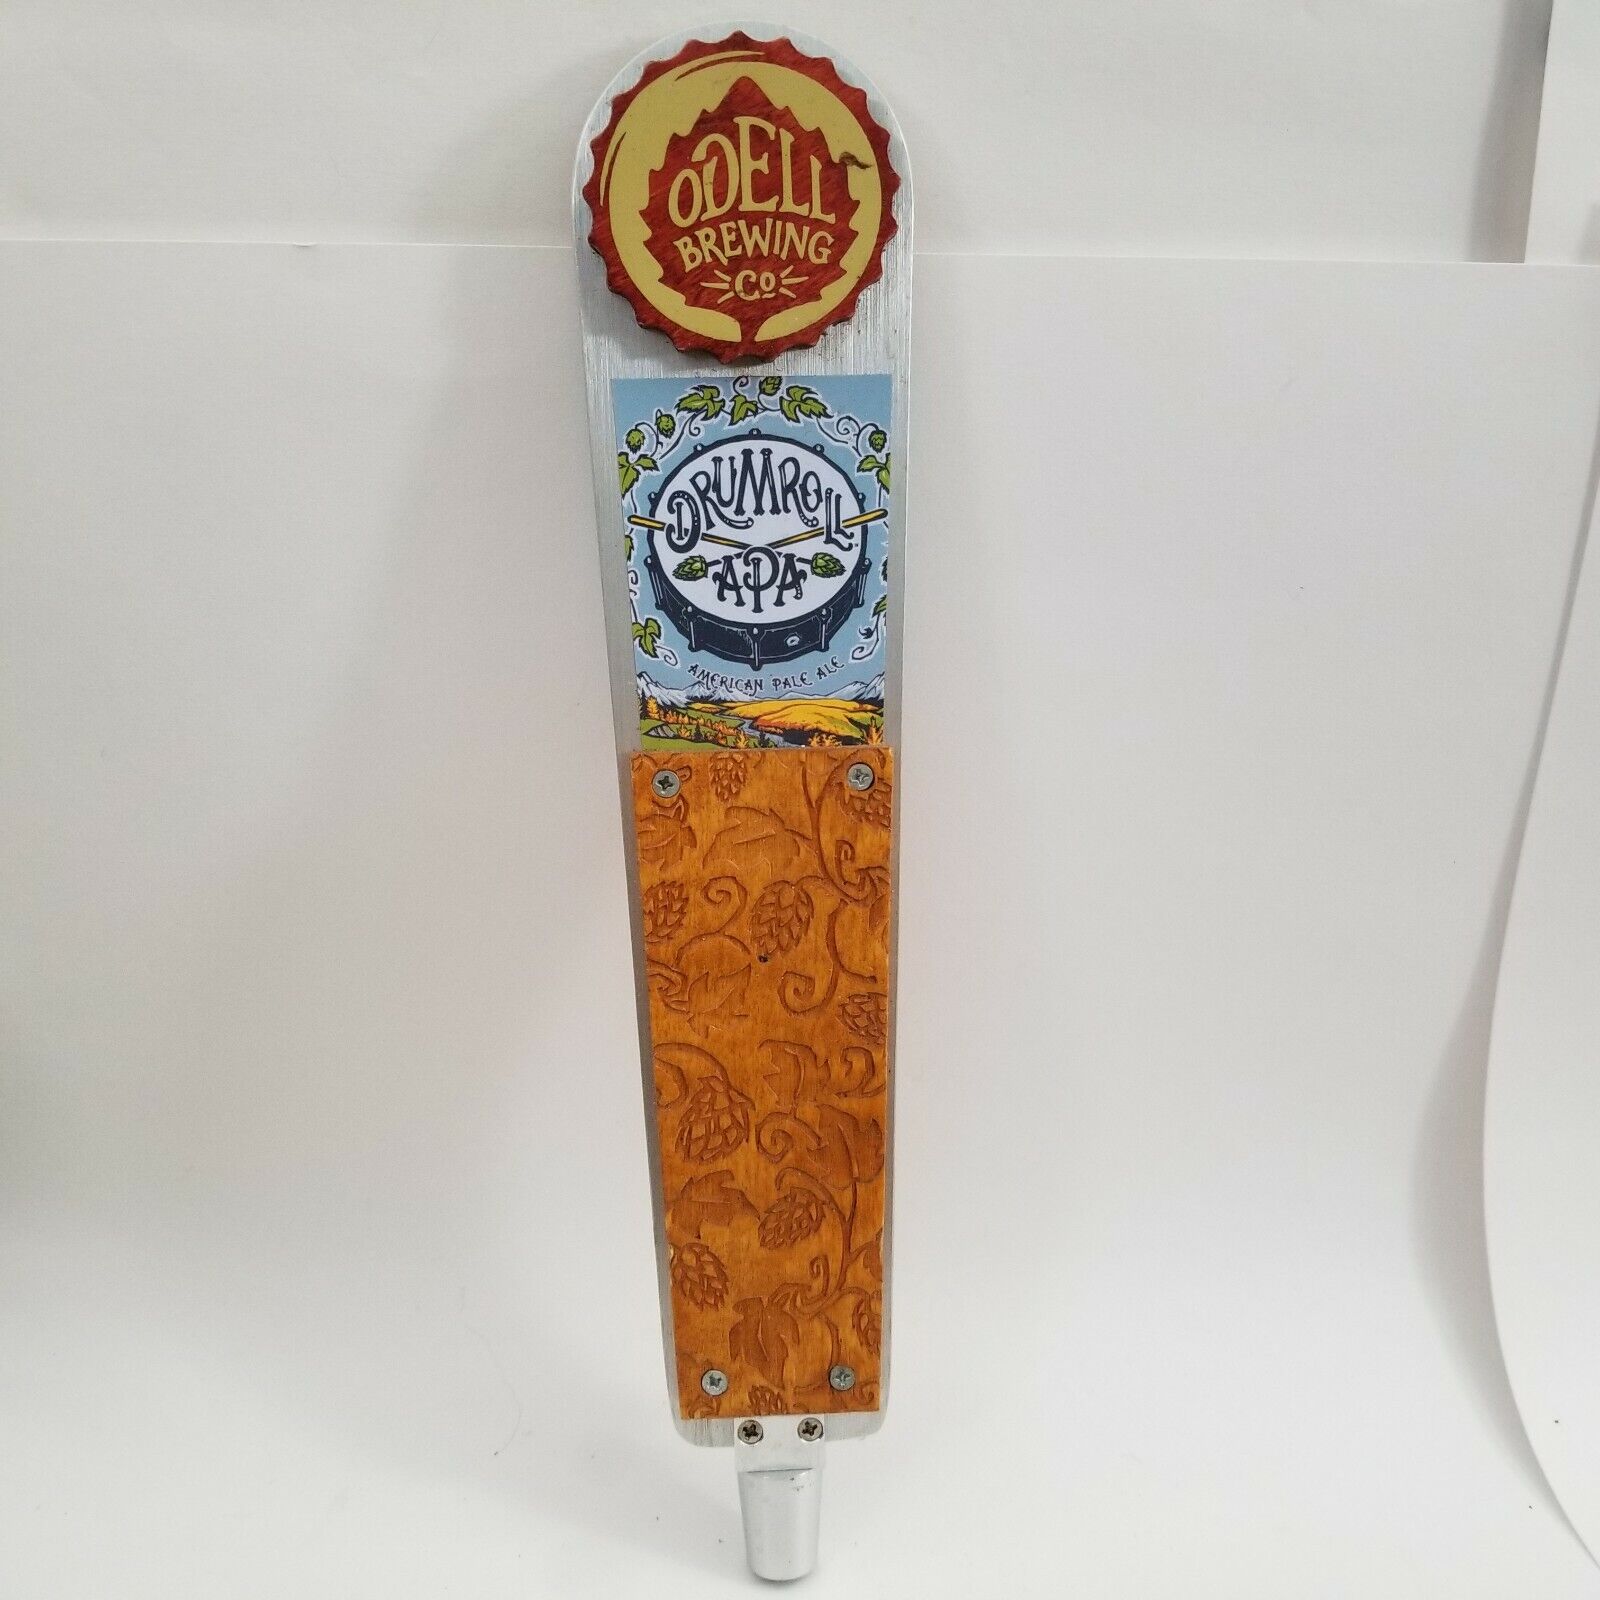 Odell Brewing Company Drumroll APA Beer Tap Handle - Denver, CO